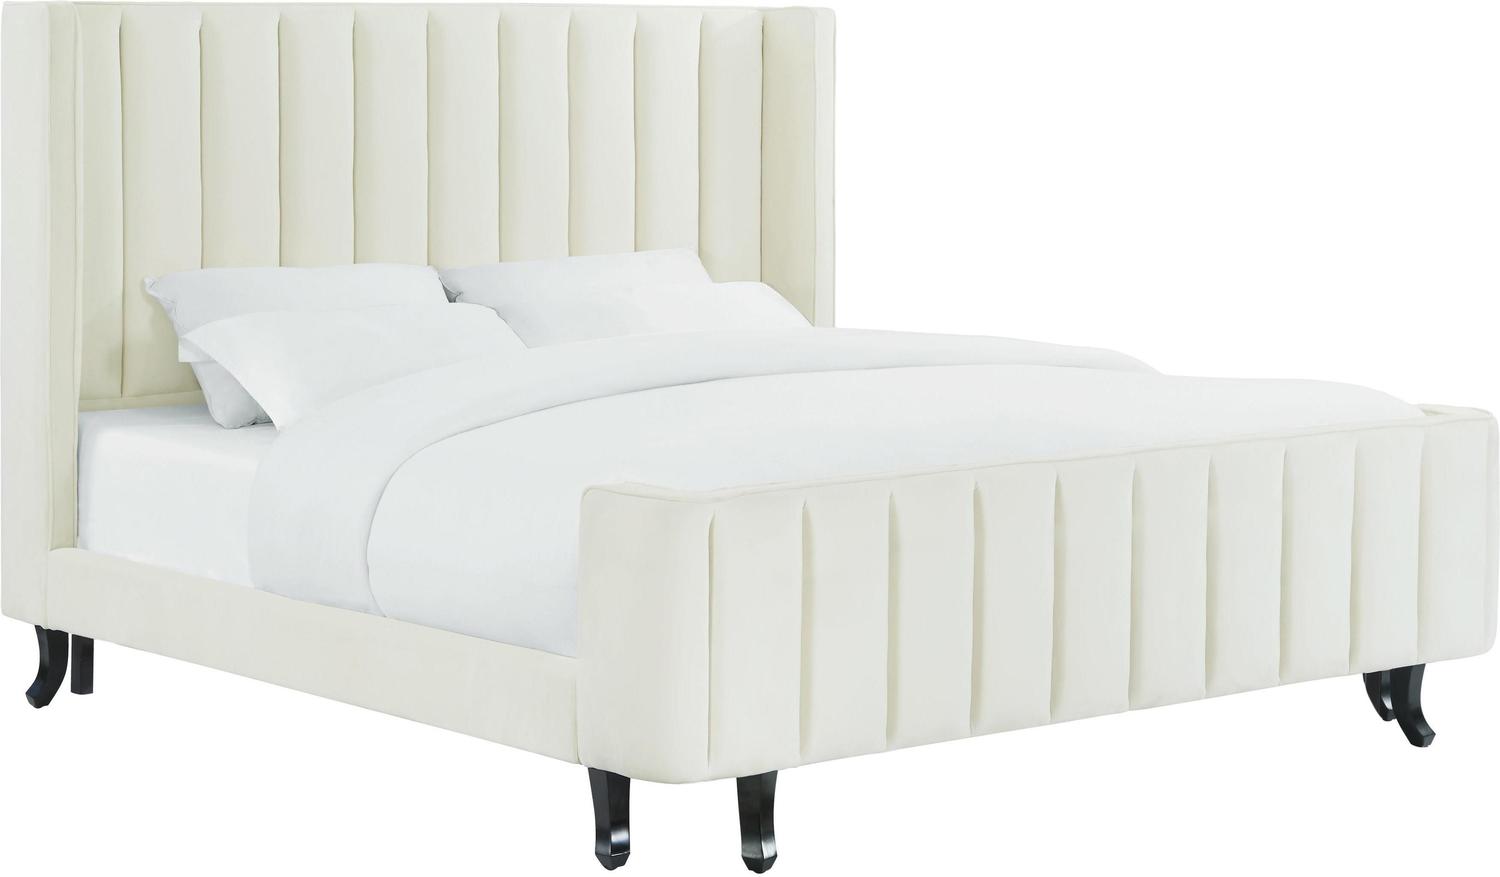 floor bed twin frame Tov Furniture Beds Cream